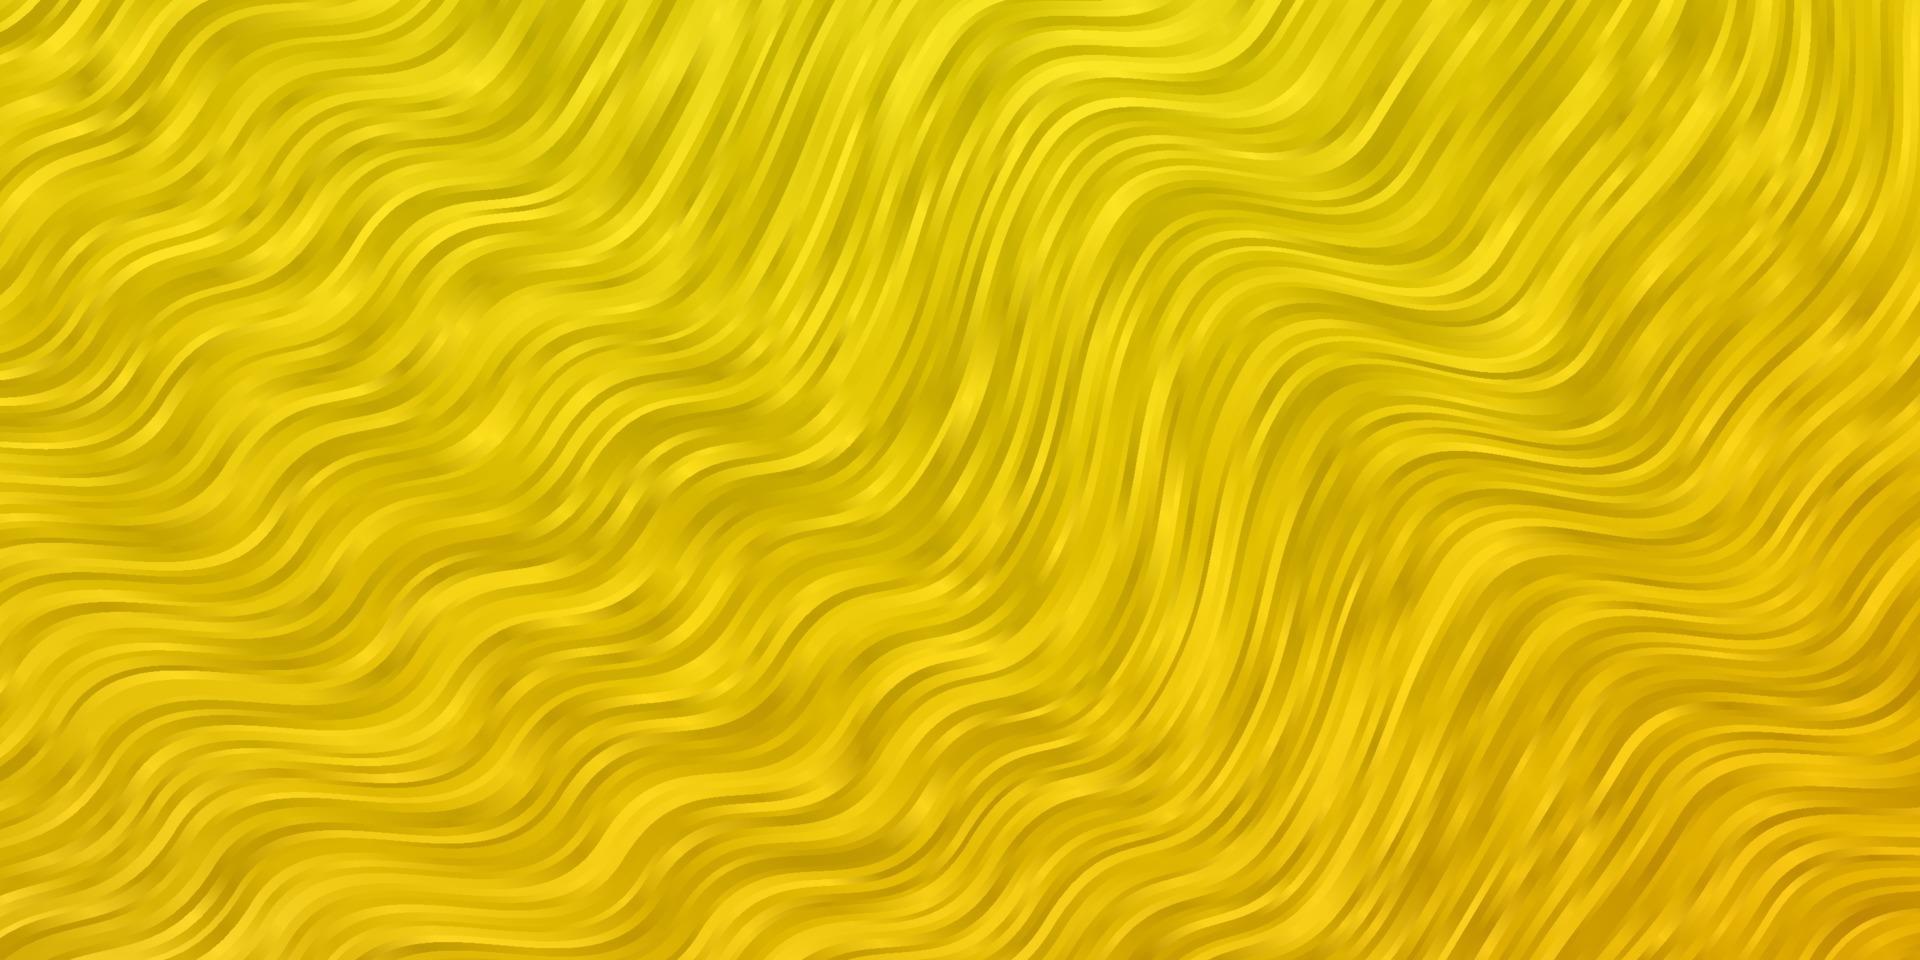 Light Yellow vector texture with curves.